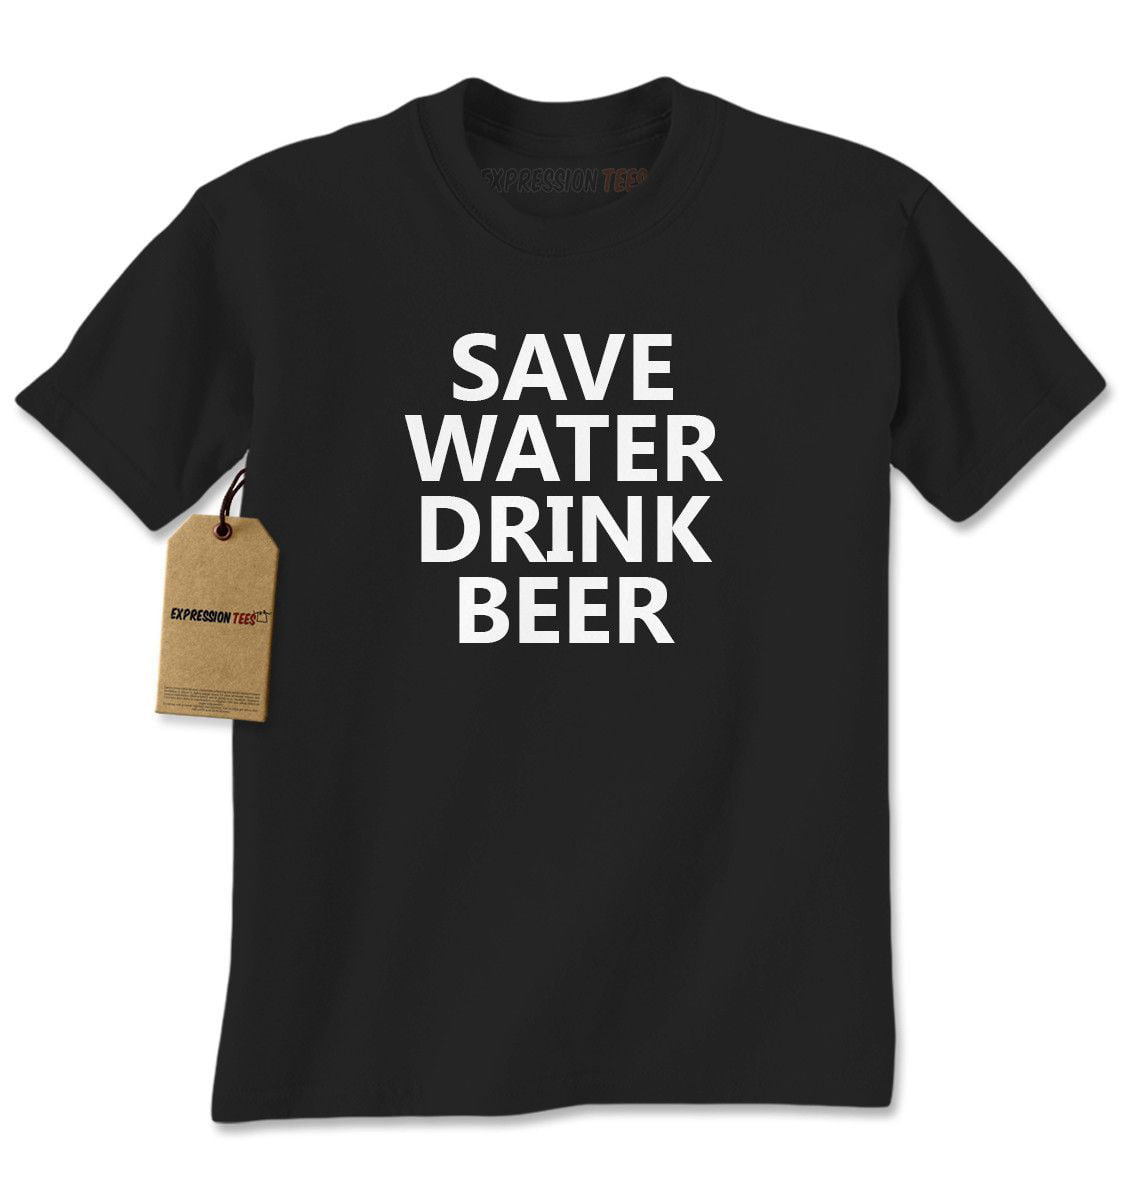 Save Water Drink Beer T-Shirt Hilarious Drinking Assorted Colors Adult S-5XL 